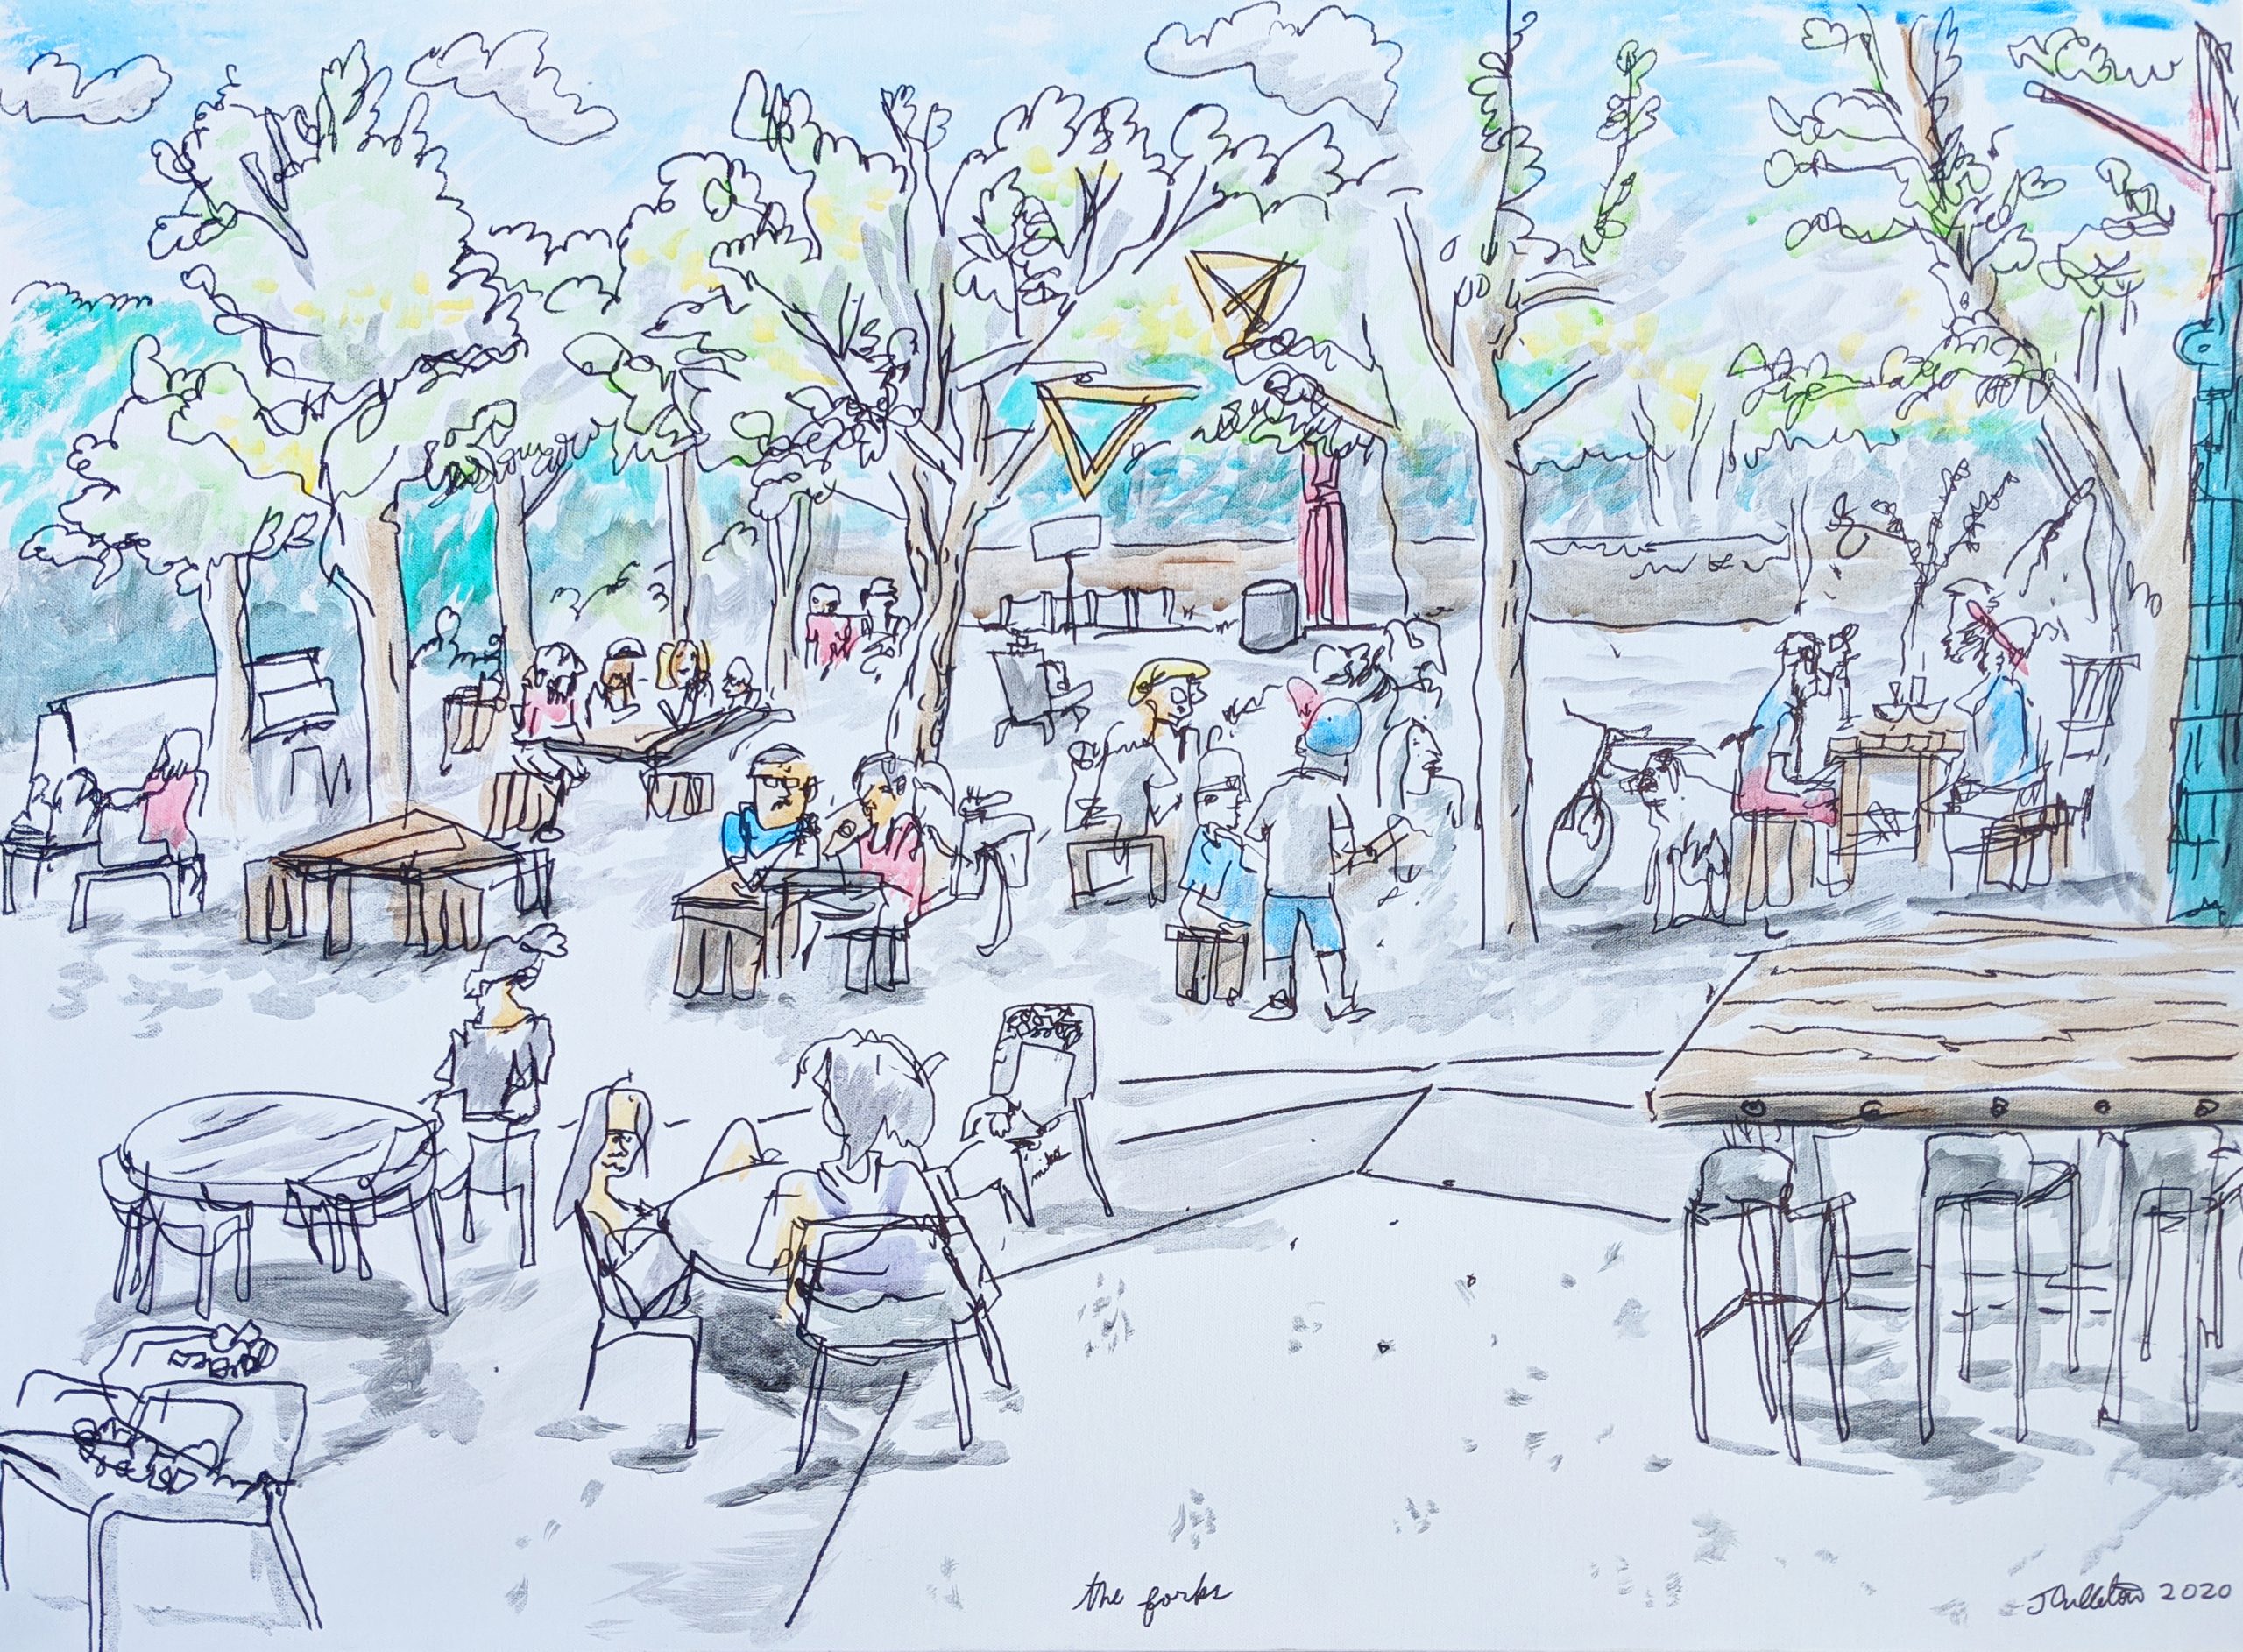 Live Painting at the Forks